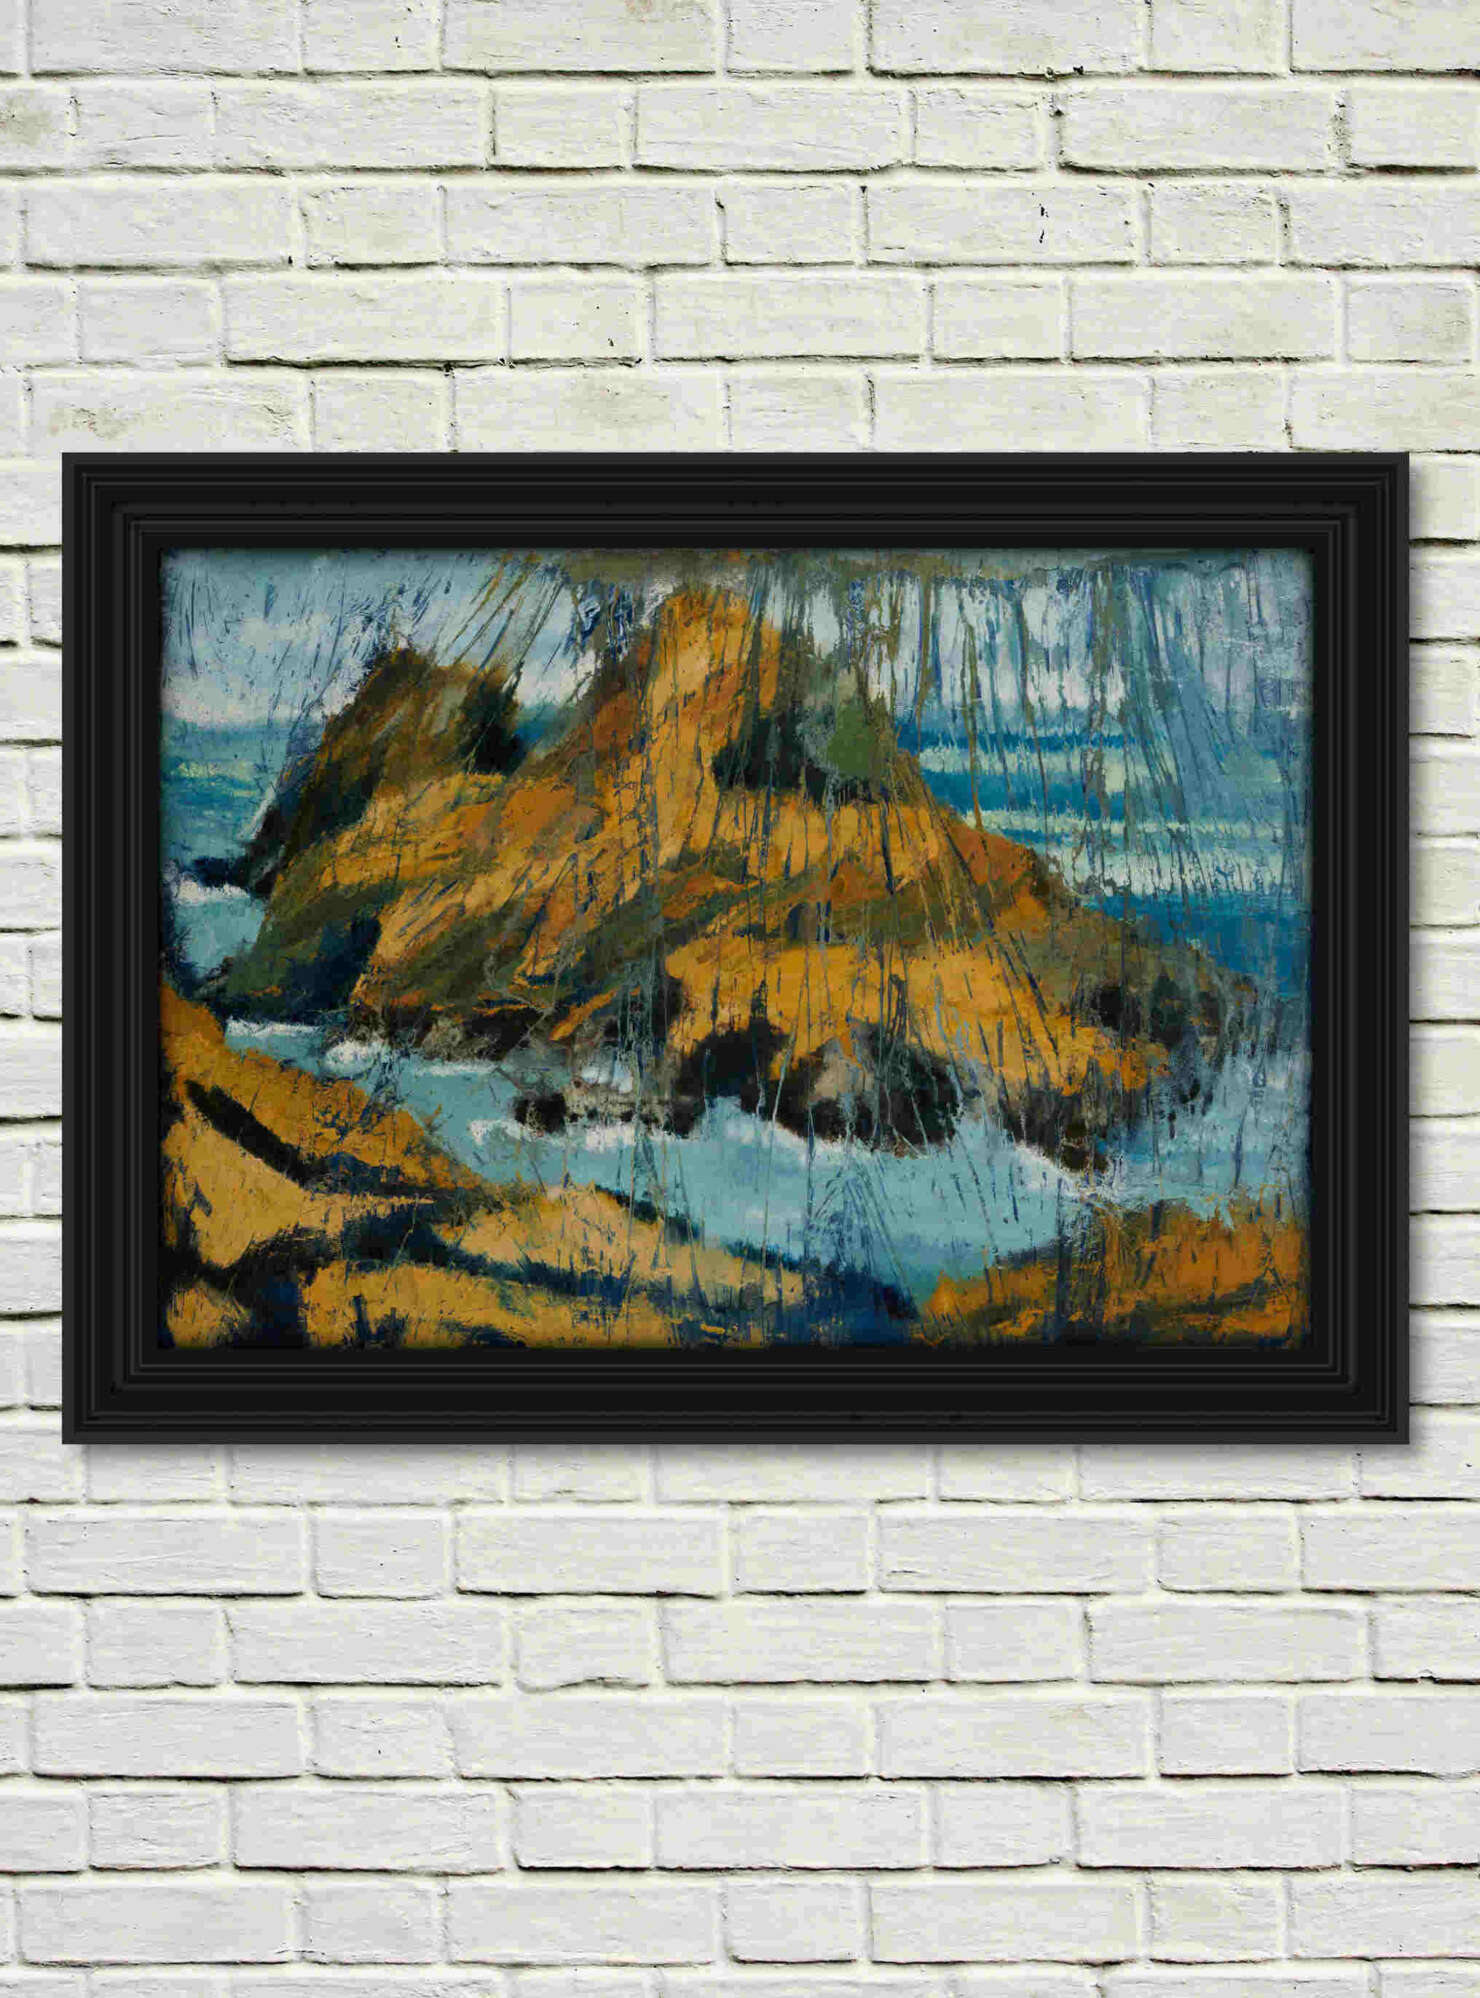 artist rod coyne's landscape "Approach Flight Puffin Island" is shown here, in a black frame on a white wall.